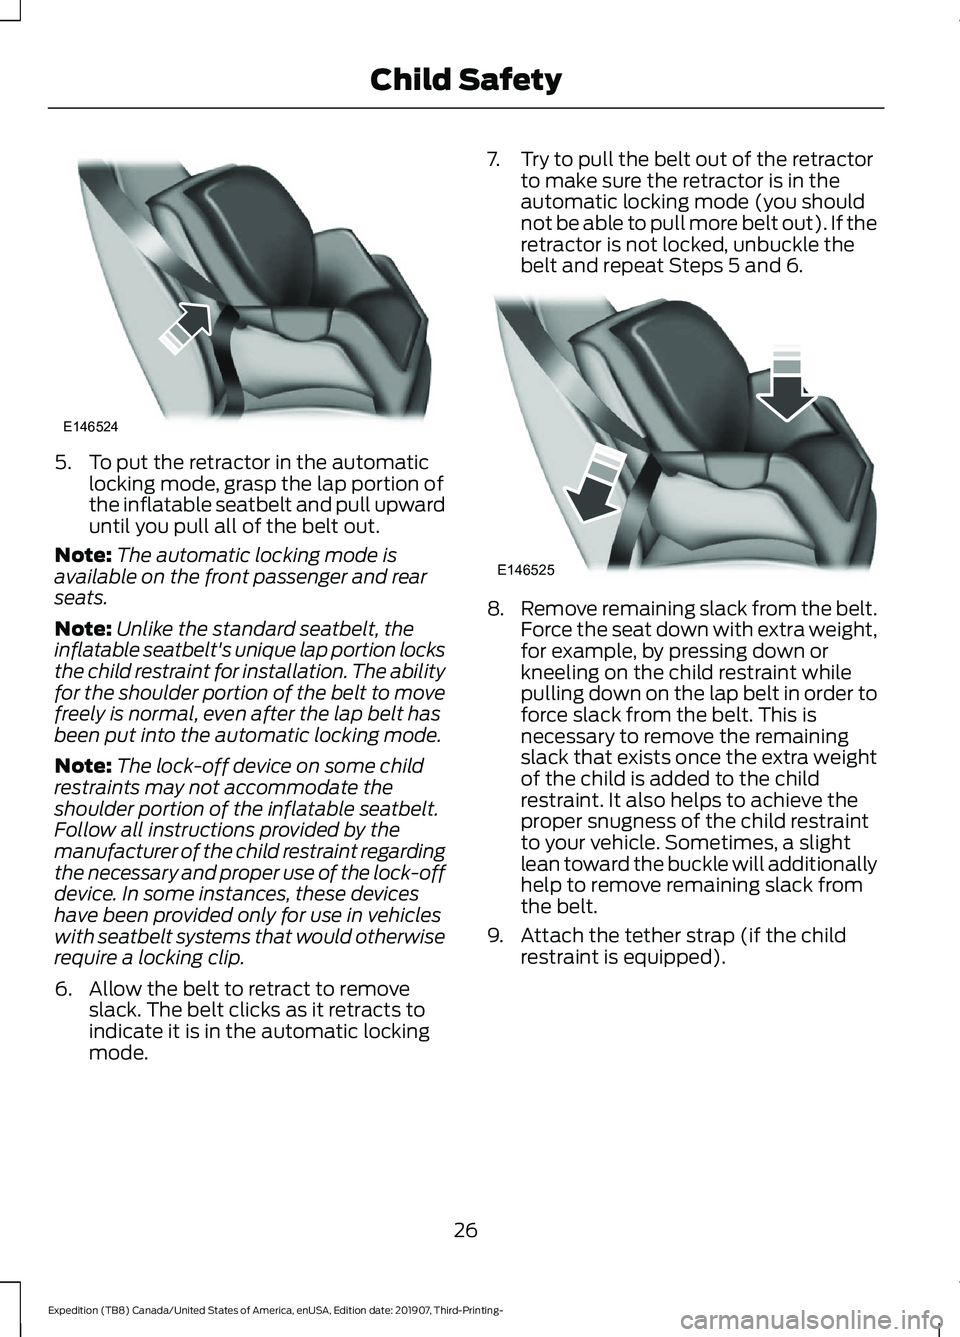 FORD EXPEDITION 2020  Owners Manual 5. To put the retractor in the automatic
locking mode, grasp the lap portion of
the inflatable seatbelt and pull upward
until you pull all of the belt out.
Note: The automatic locking mode is
availabl